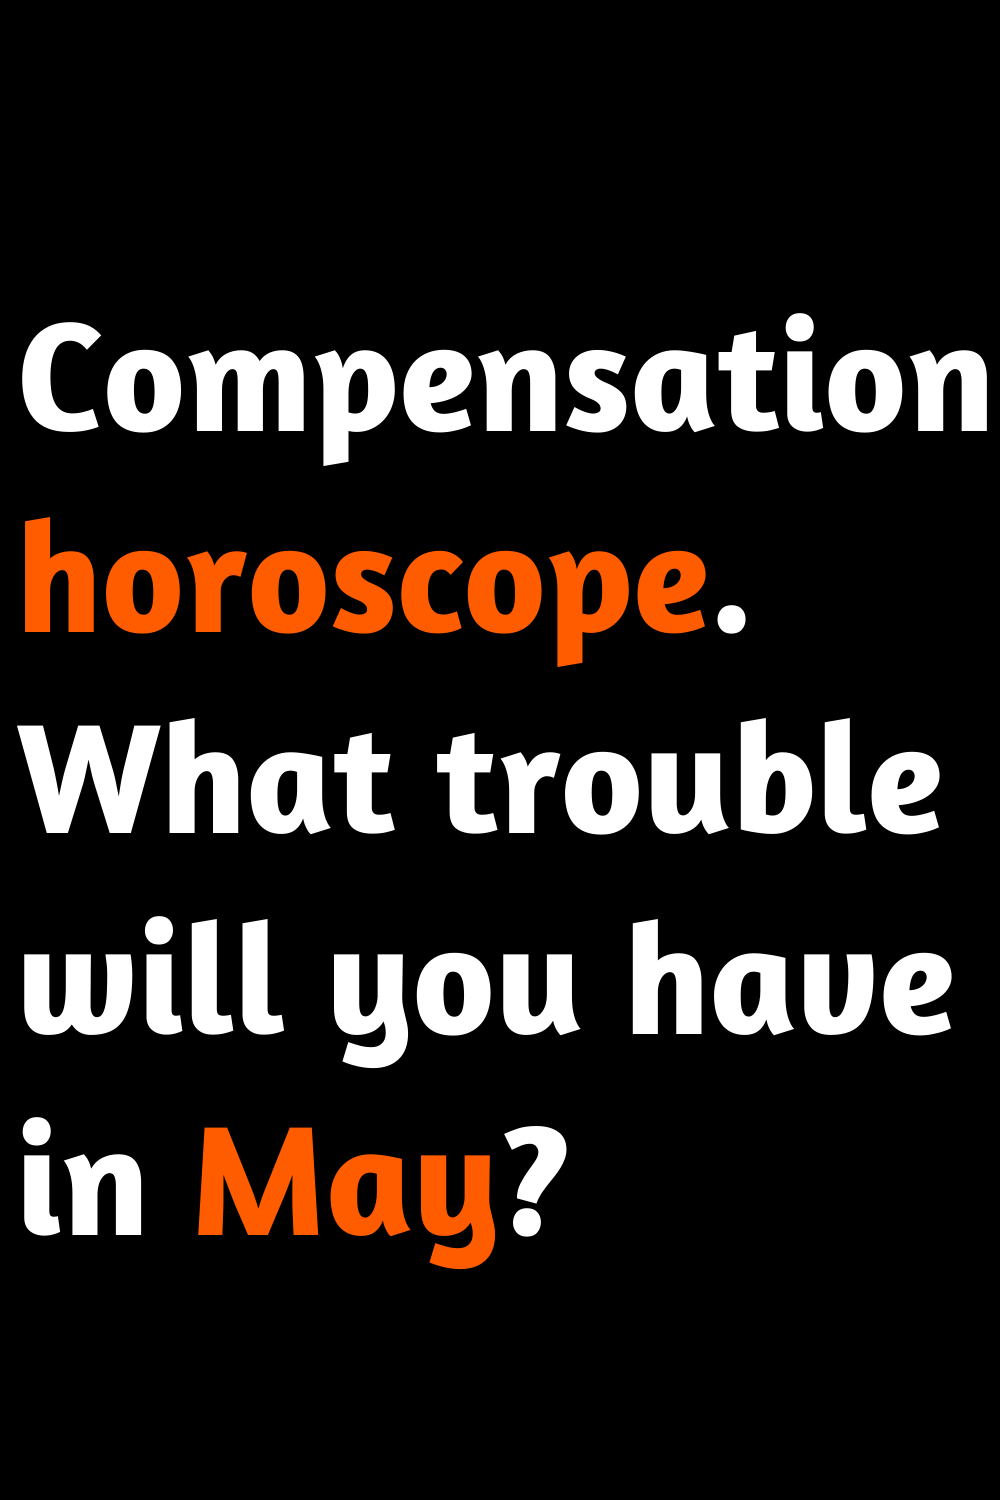 Compensation horoscope. What trouble will you have in May?